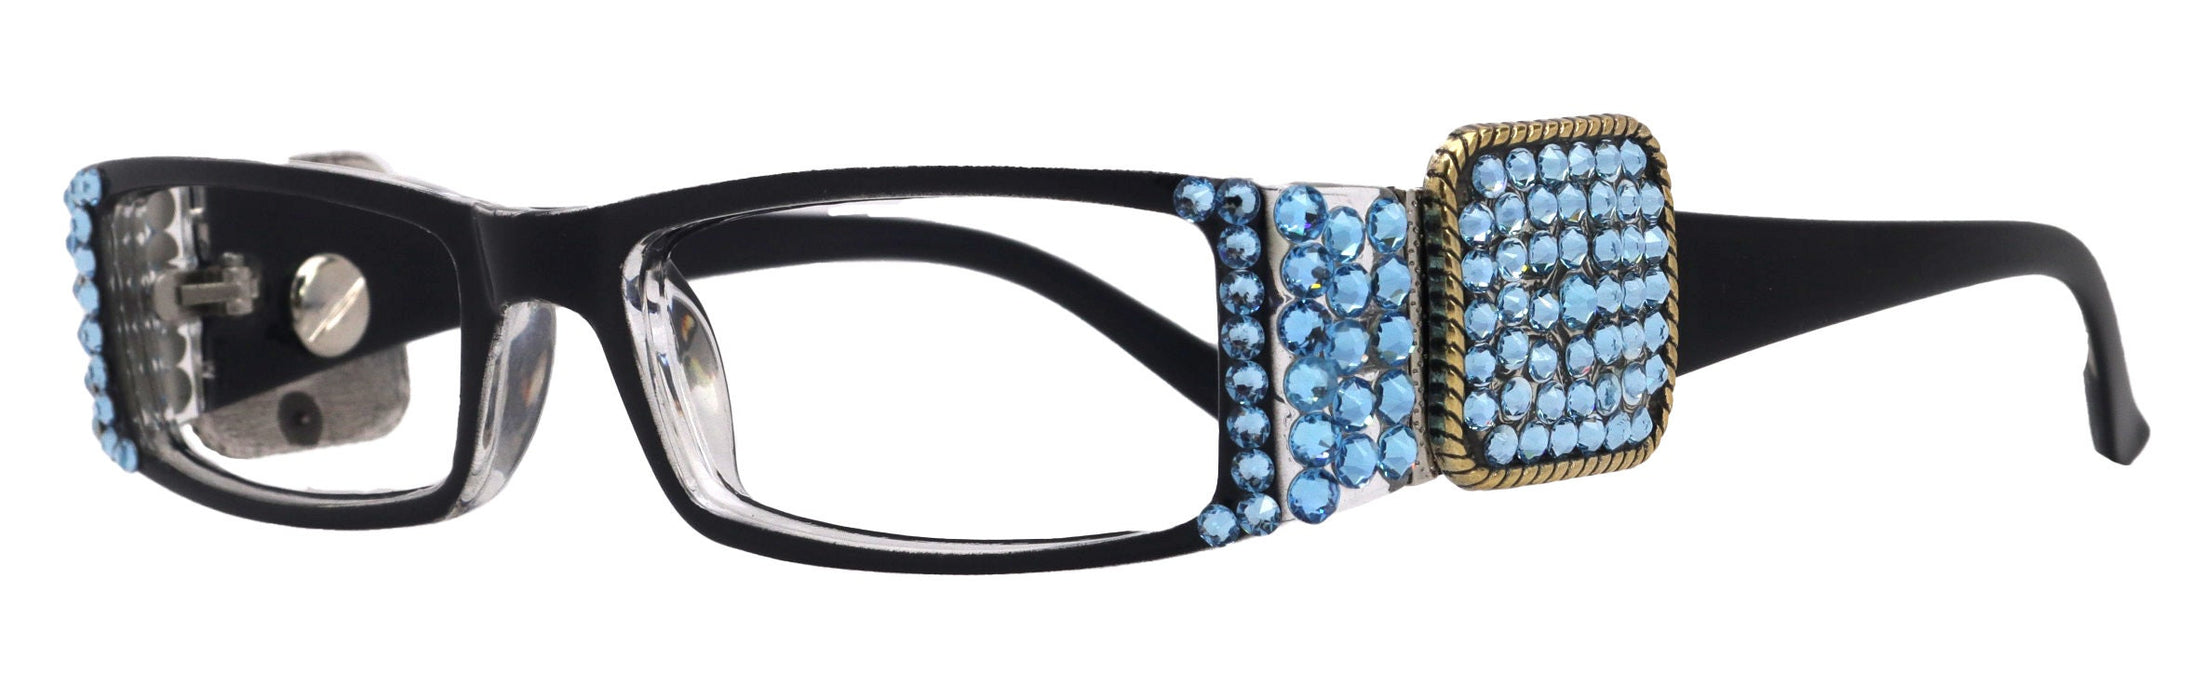 The Medallion, (Bling) Reading Glasses for Women Black W (AquaMarine Genuine European Crystals Western Concho NY Fifth Avenue